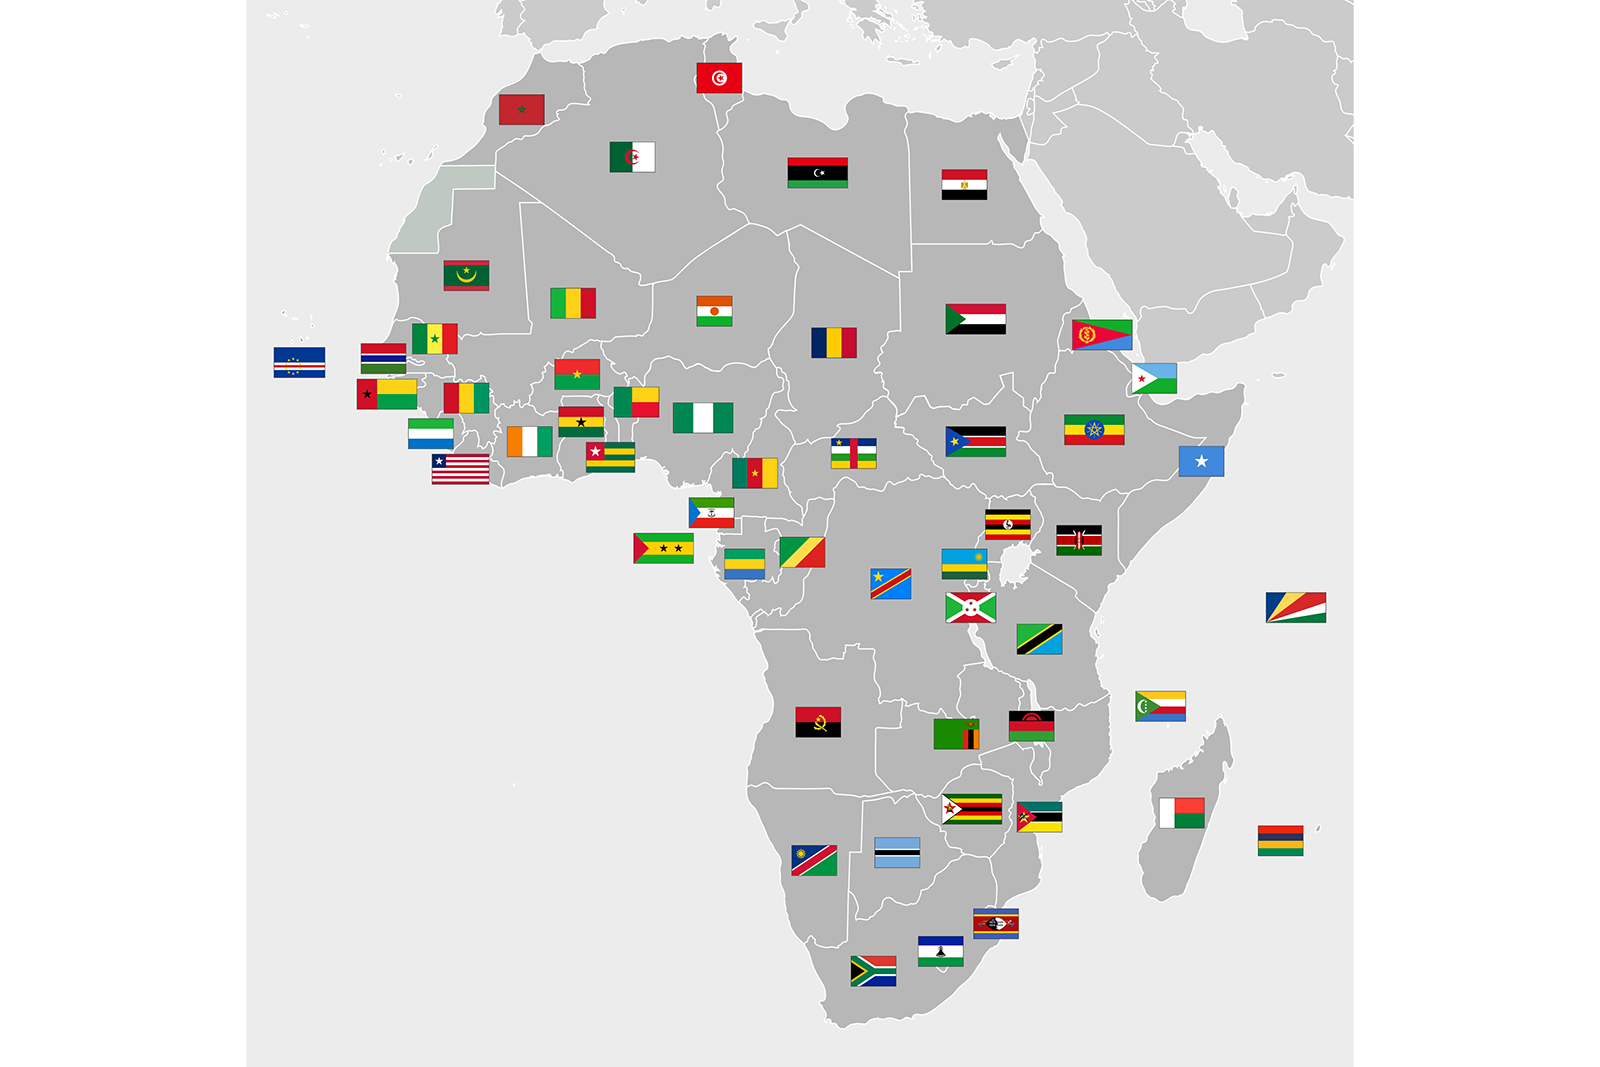 Map of Africa with flags over each country